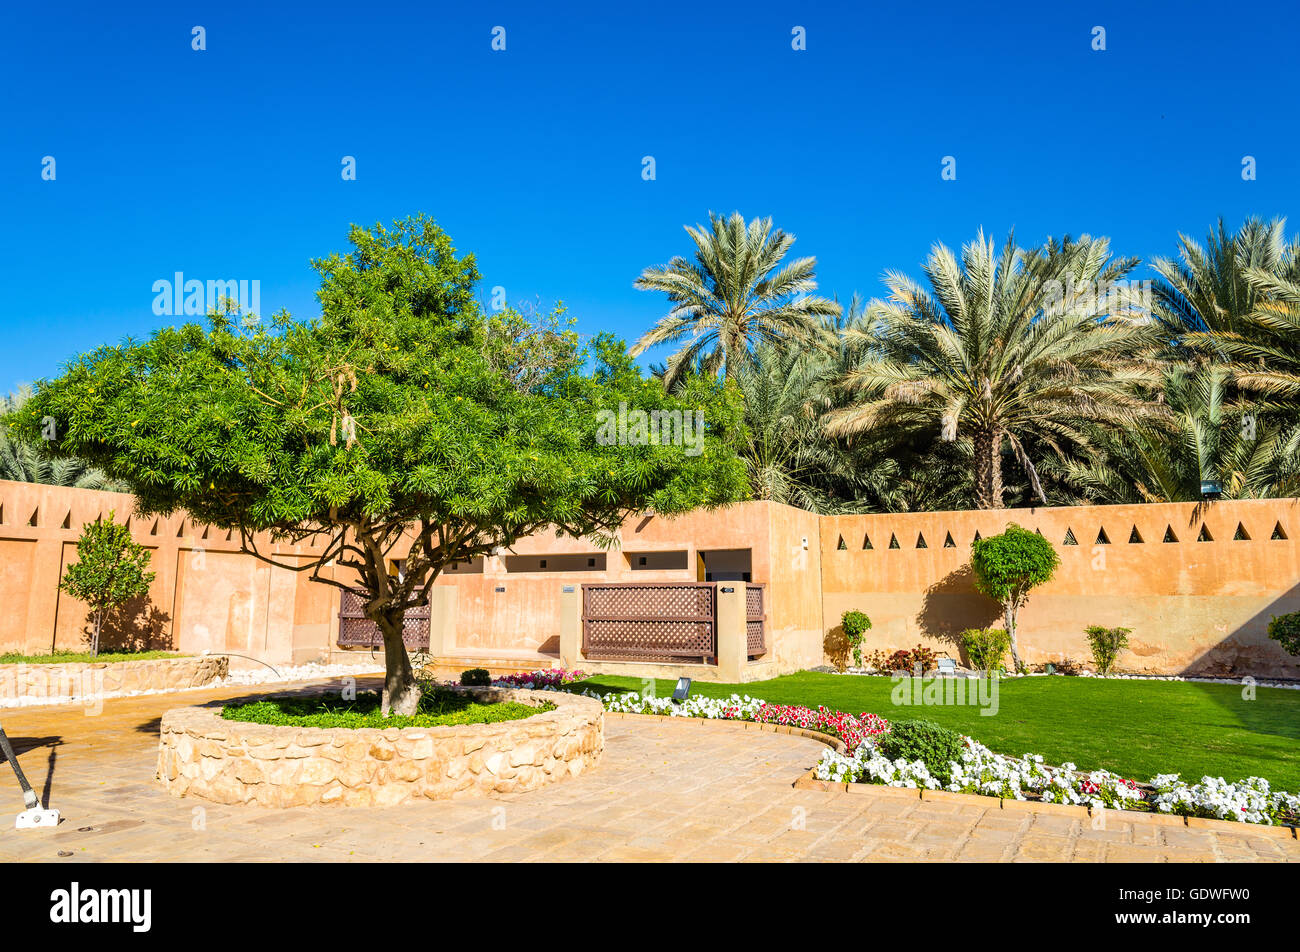 Garden at Al Ain Palace Museum - UAE Stock Photo